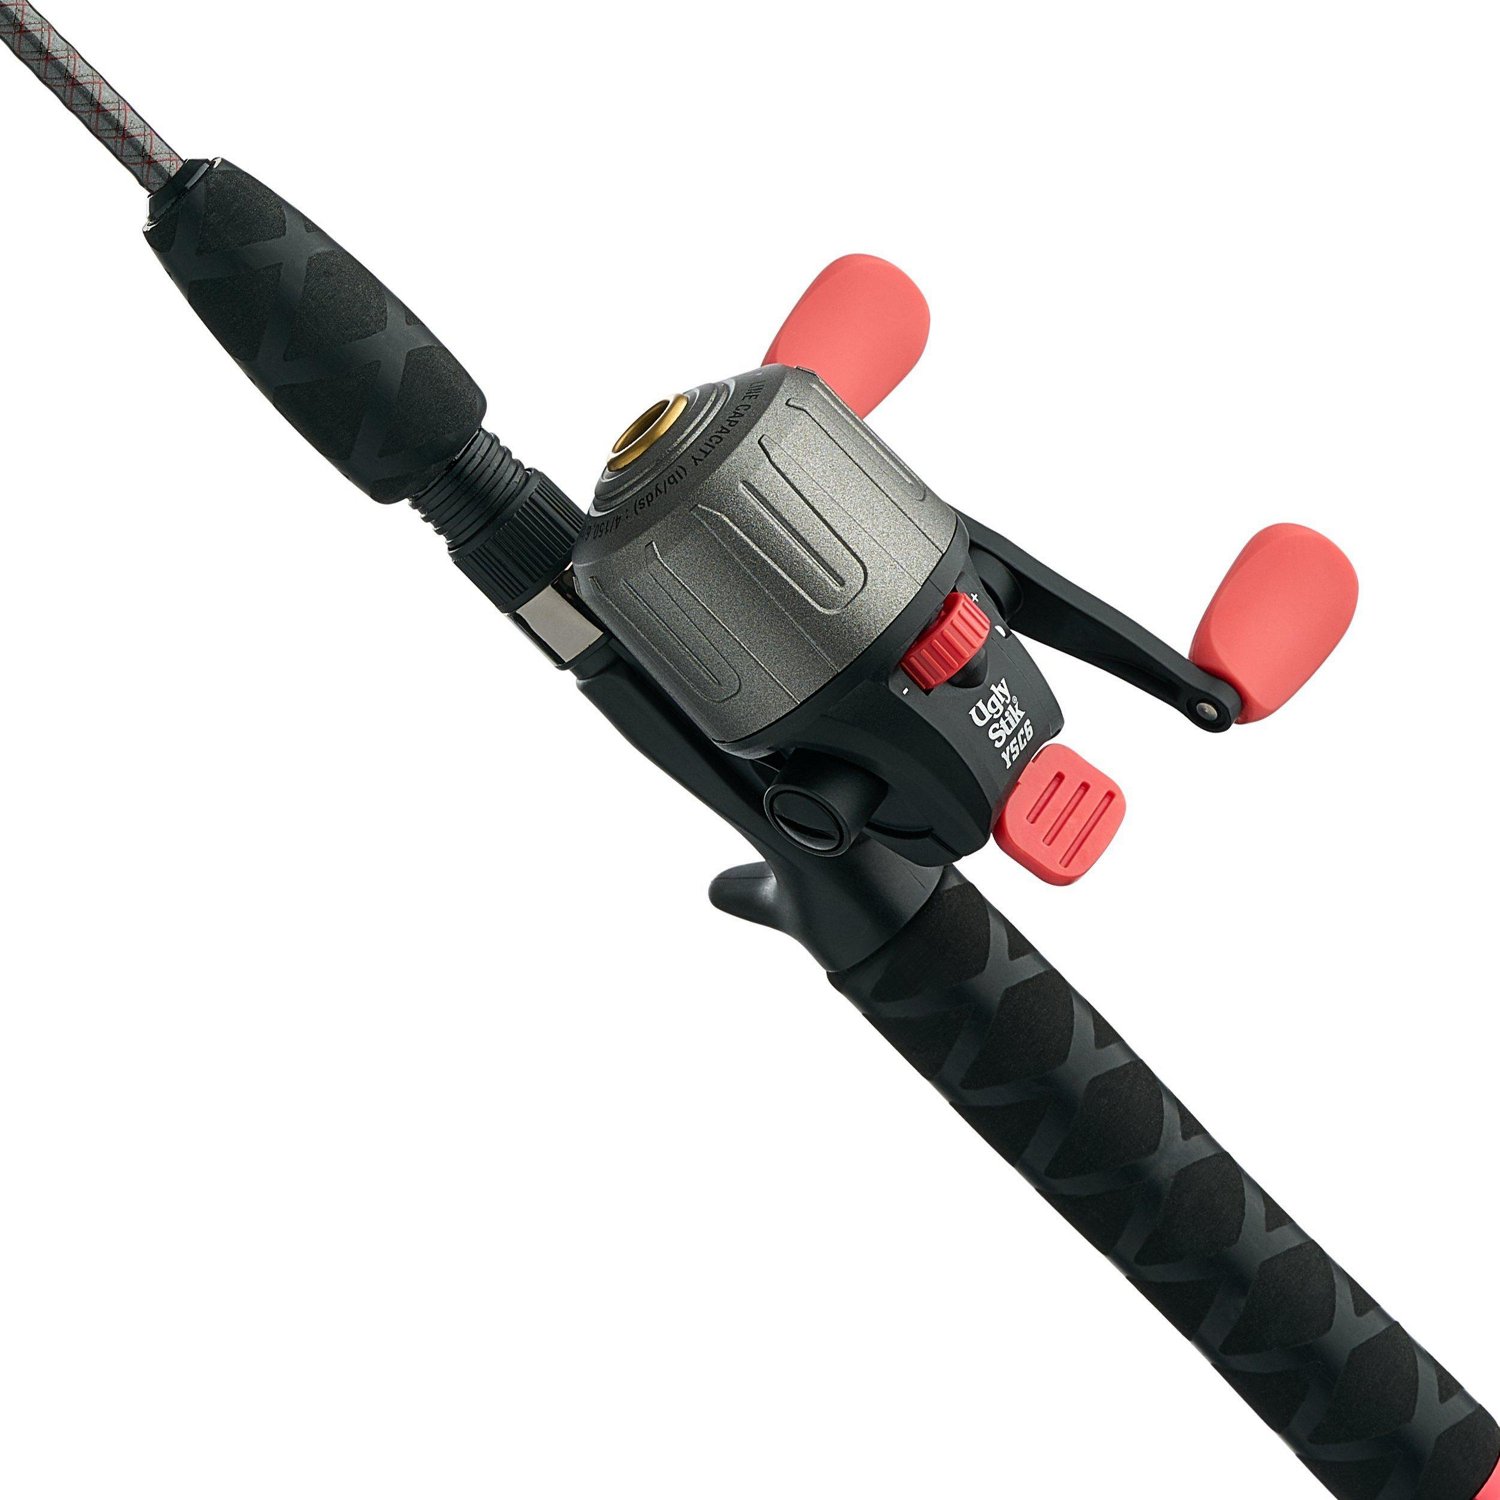 https://academy.scene7.com/is/image/academy//fishing-rod---reel-combos/ugly-stik-ugly-tuff-8-spincast-combo-ustuffy461m/sc6cbo-/324788f149504896b24cebcb273691cd?$pdp-mobile-gallery-ng$